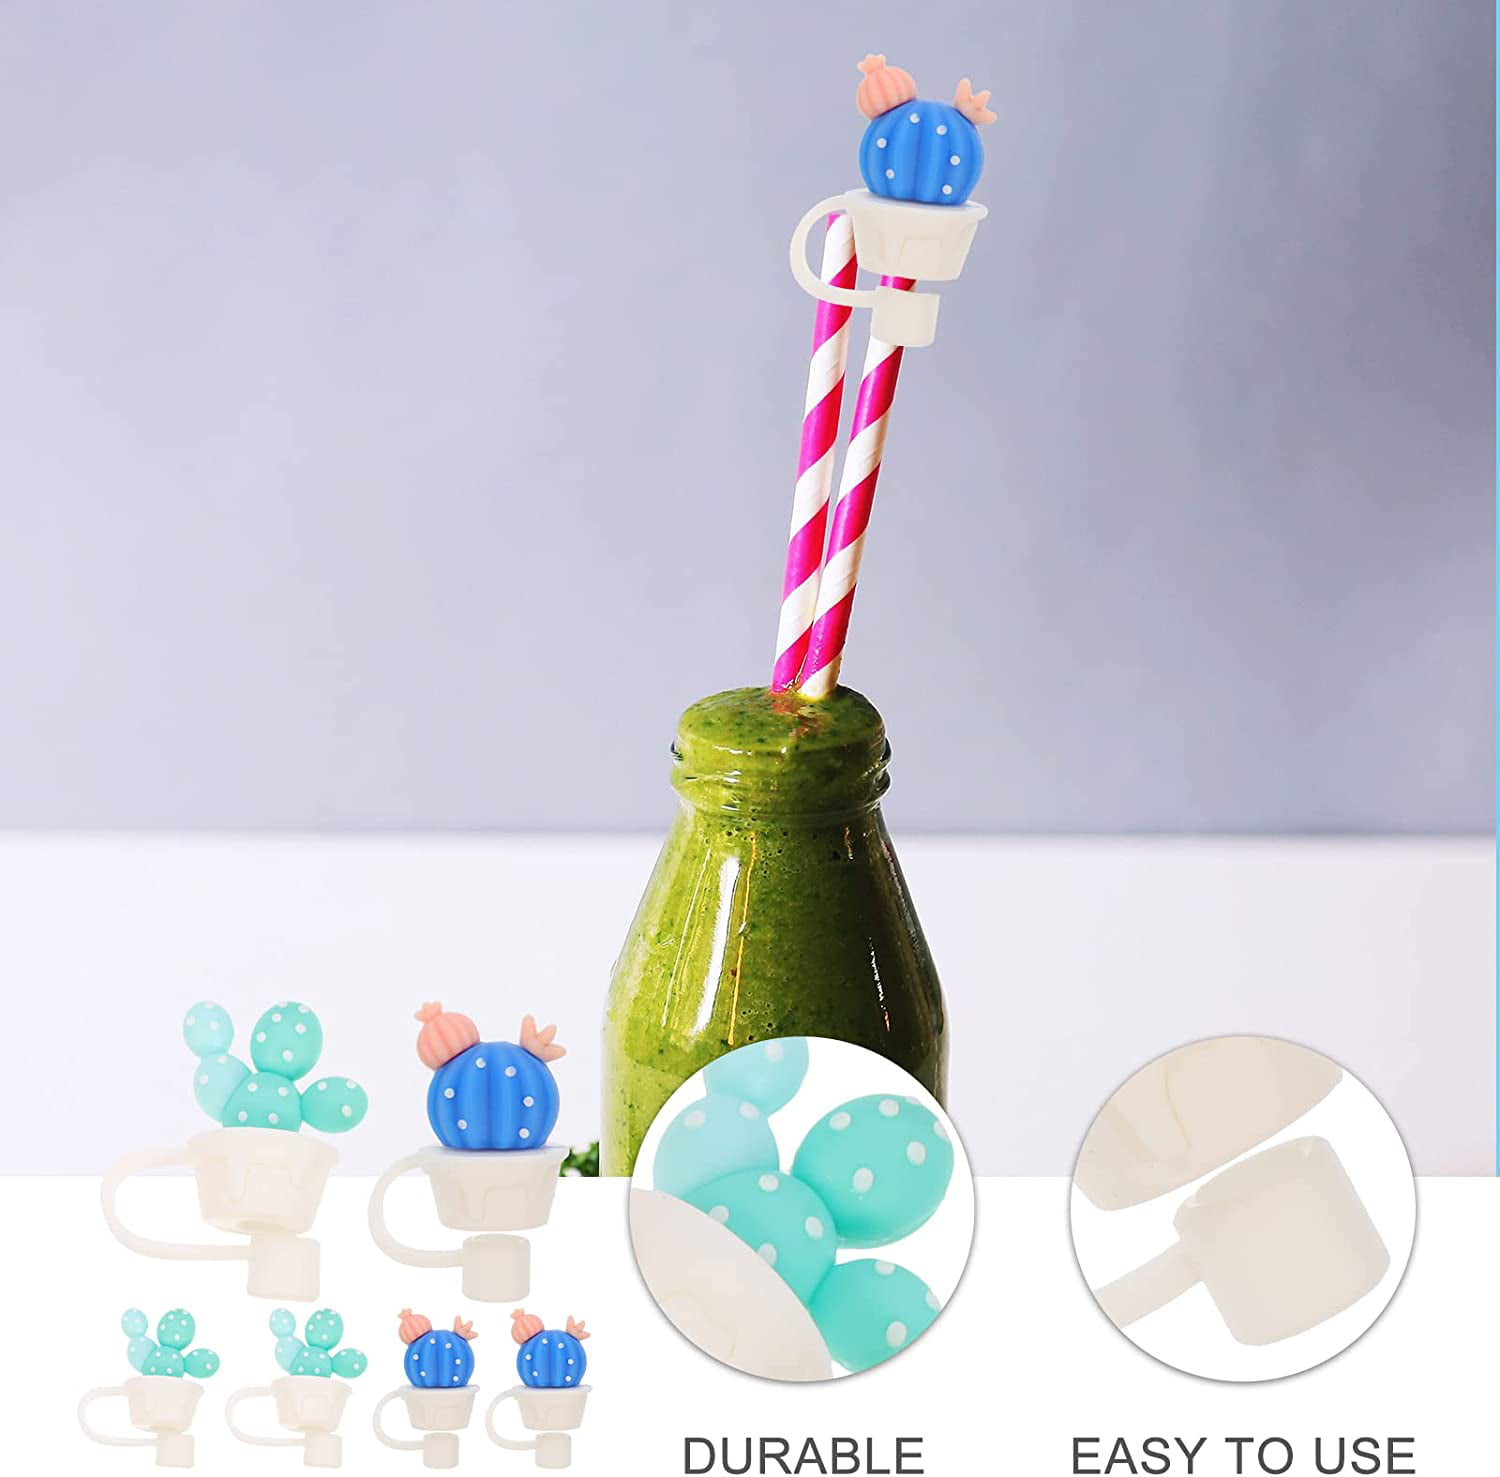 Straw Topper Cover Cactus Silicone Cap for Reusable Plastic Straws, Cute  Cactus Silicone Straw Covers Tops Fits Most Straws 